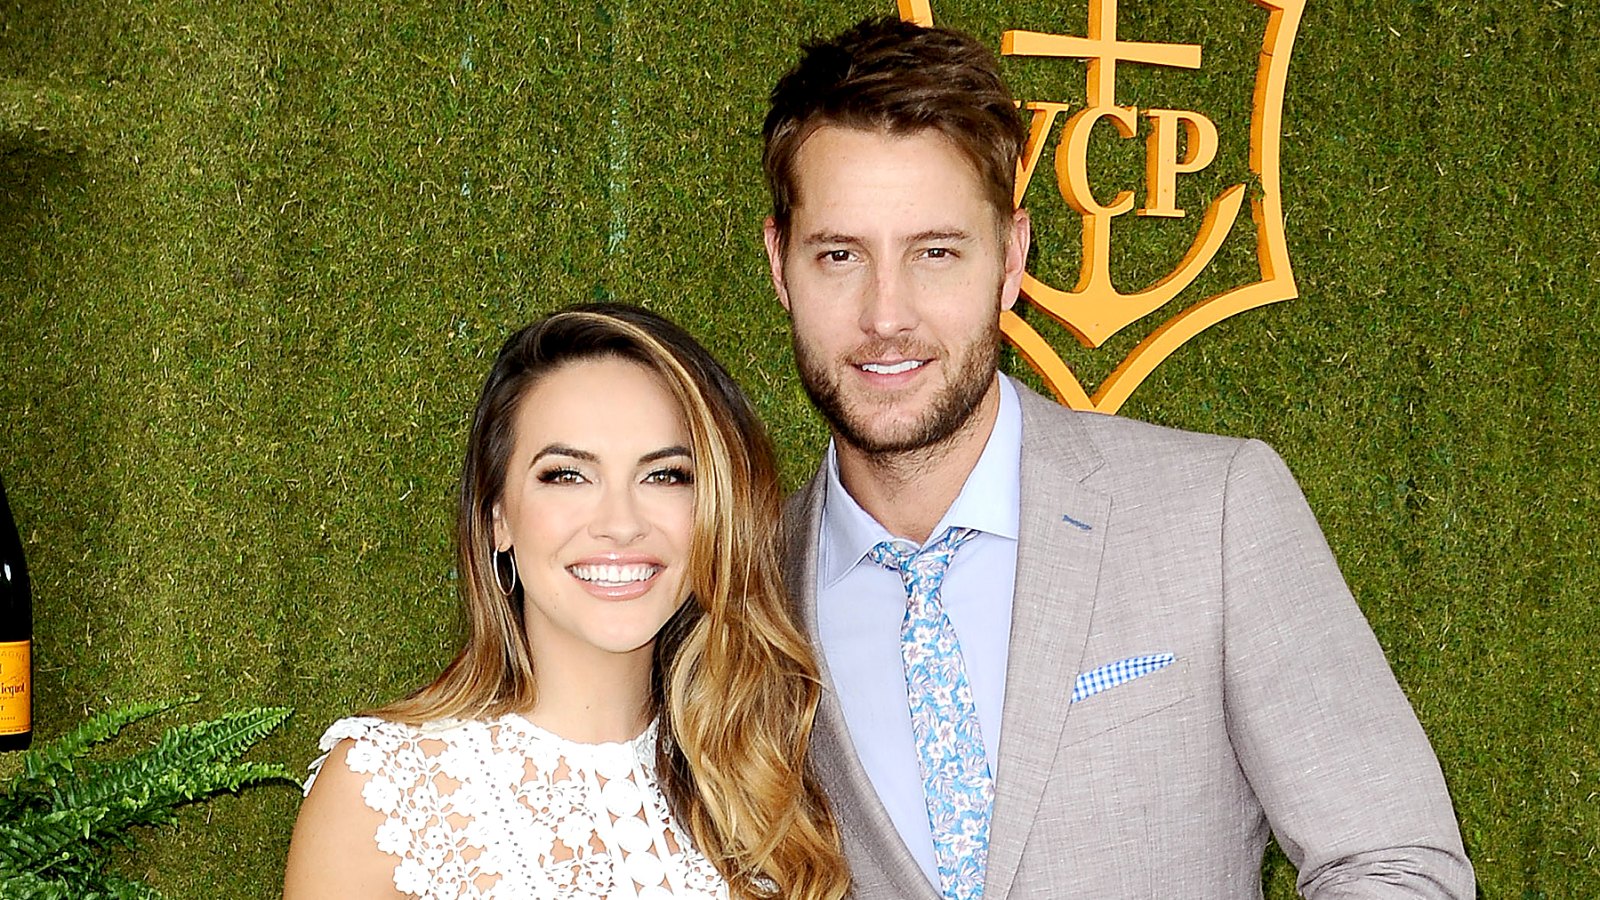 Chrishell Stause and Justin Hartley attend the 8th annual Veuve Clicquot Polo Classic at Will Rogers State Historic Park on October 14, 2017 in Pacific Palisades, California.